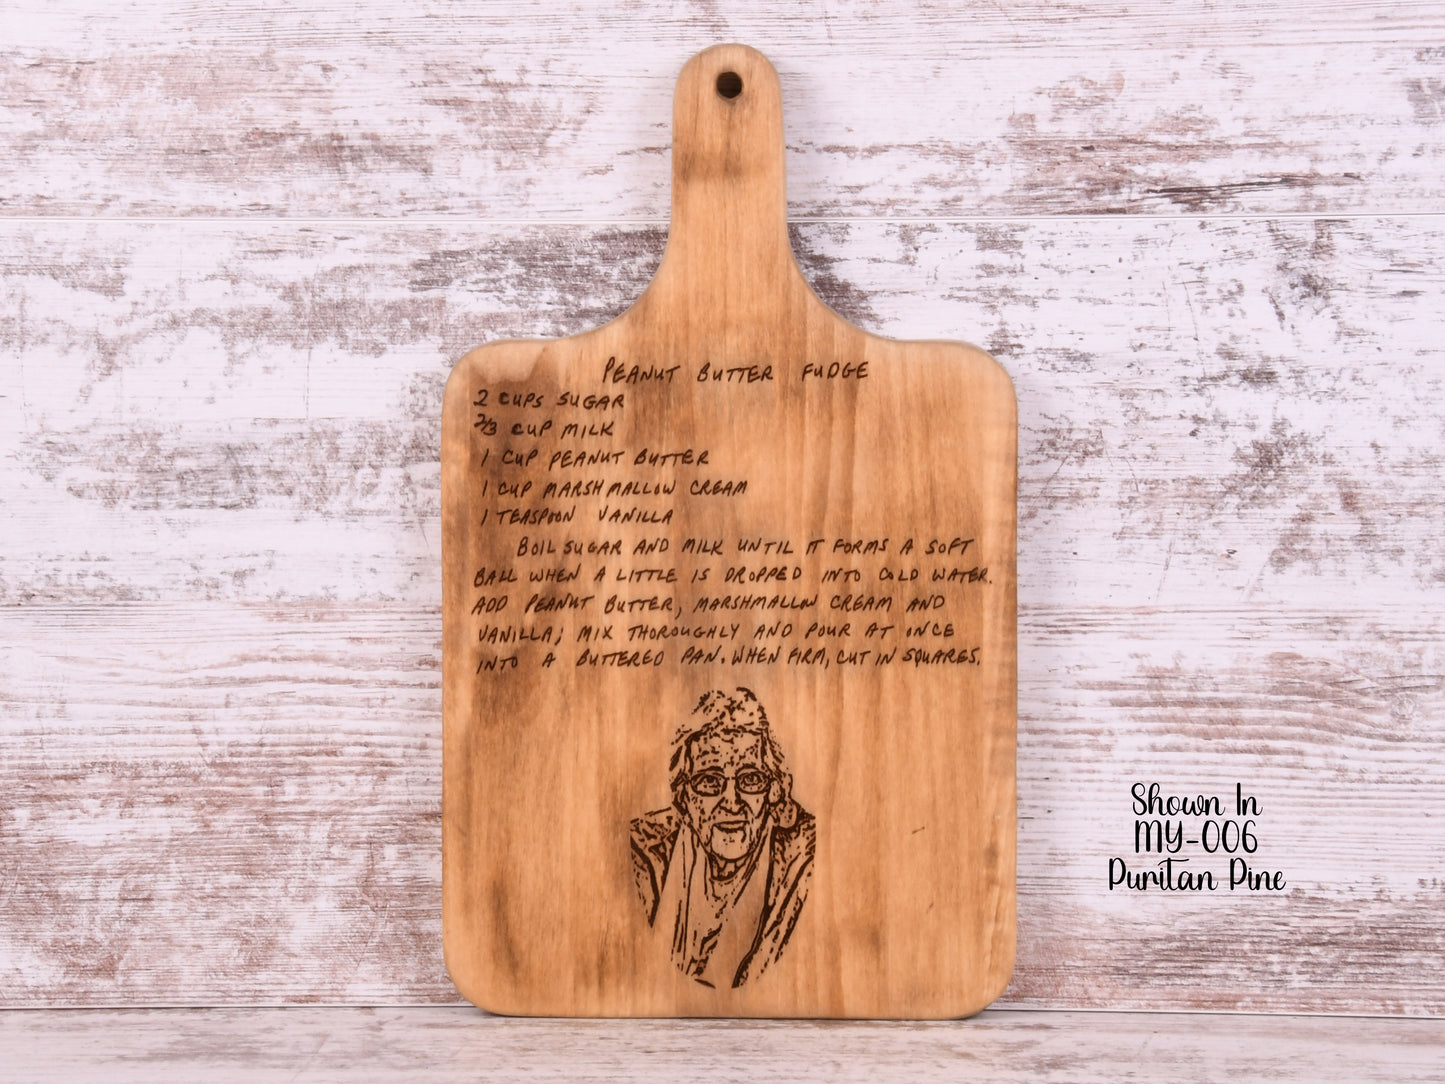 Rustic Heirloom Cutting Board with Photo and Handwritten Recipe